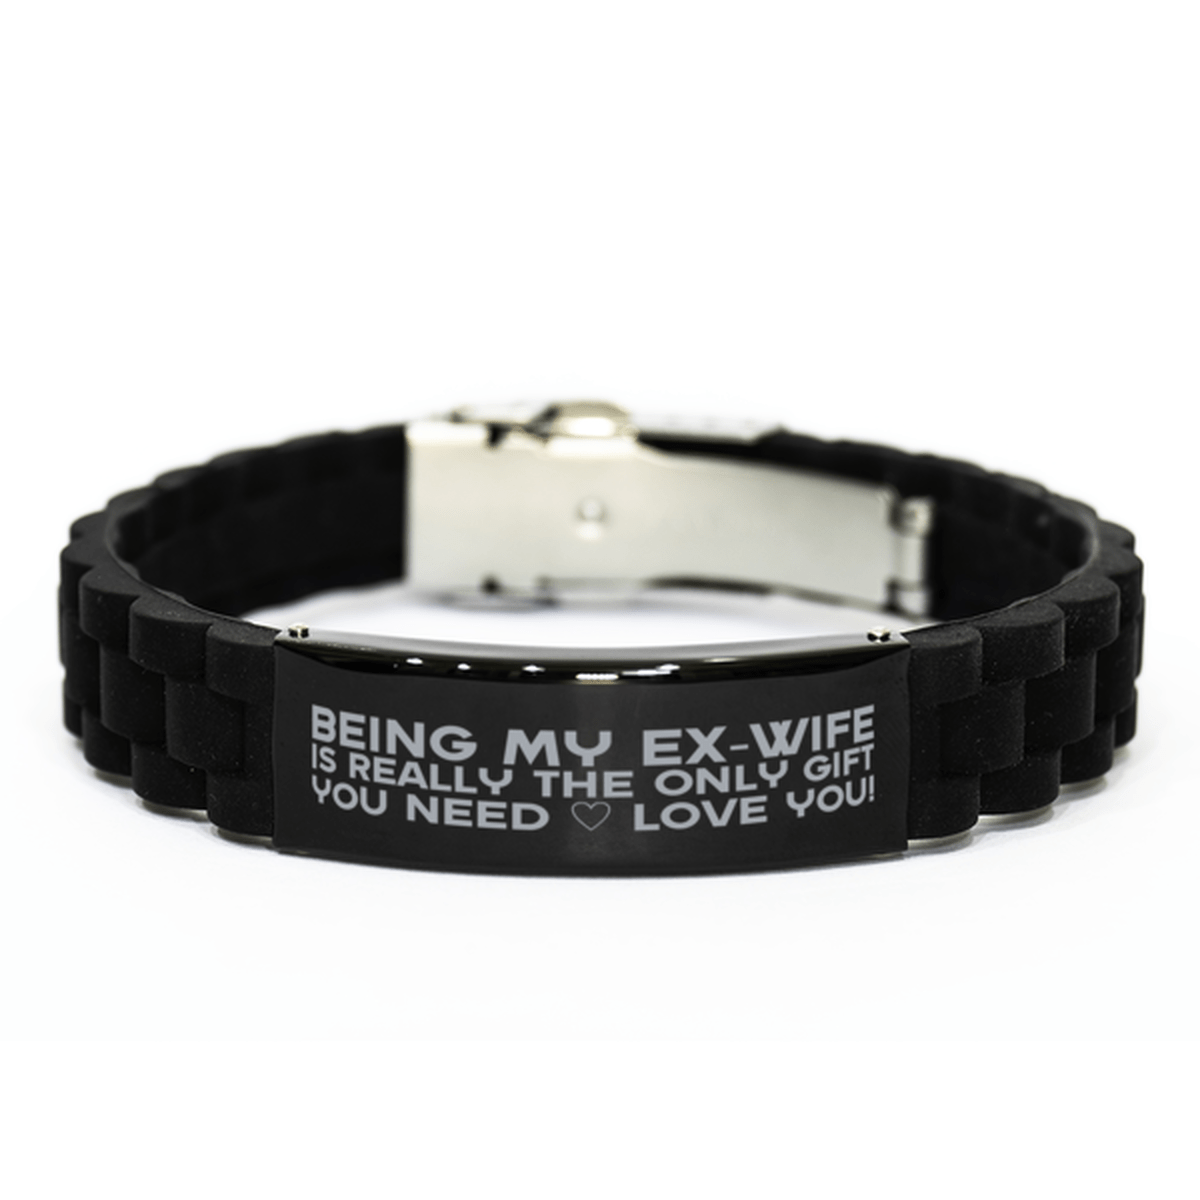 Funny Ex-wife Bracelet, Being My Ex-wife Is Really the Only Gift You Need, Best Birthday Gifts for Ex-wife